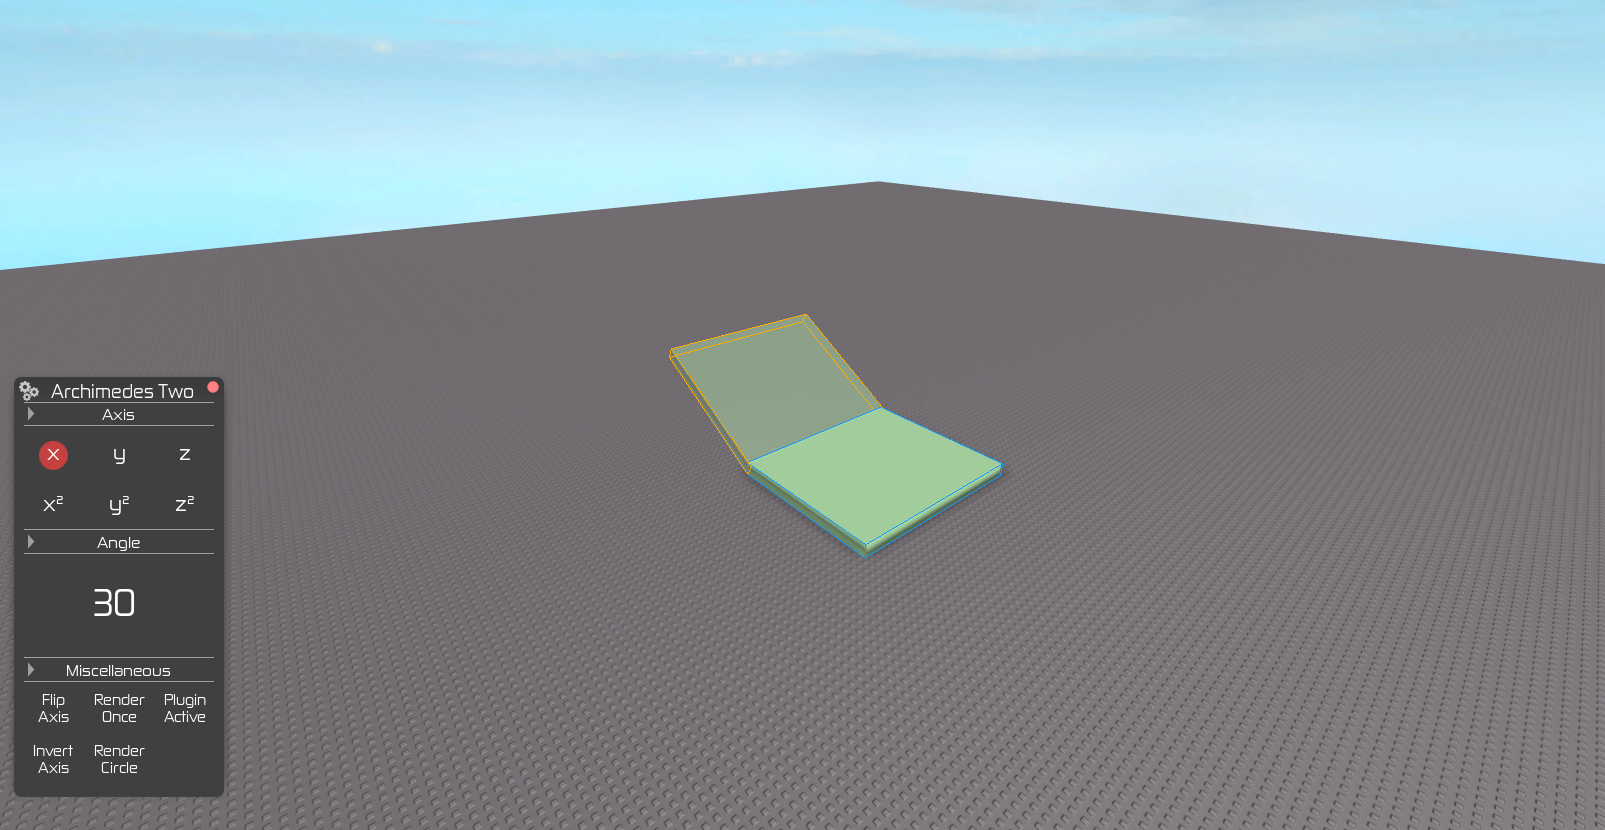 Top 10 Best Plugins On Roblox. Exactly as the tile says, in this